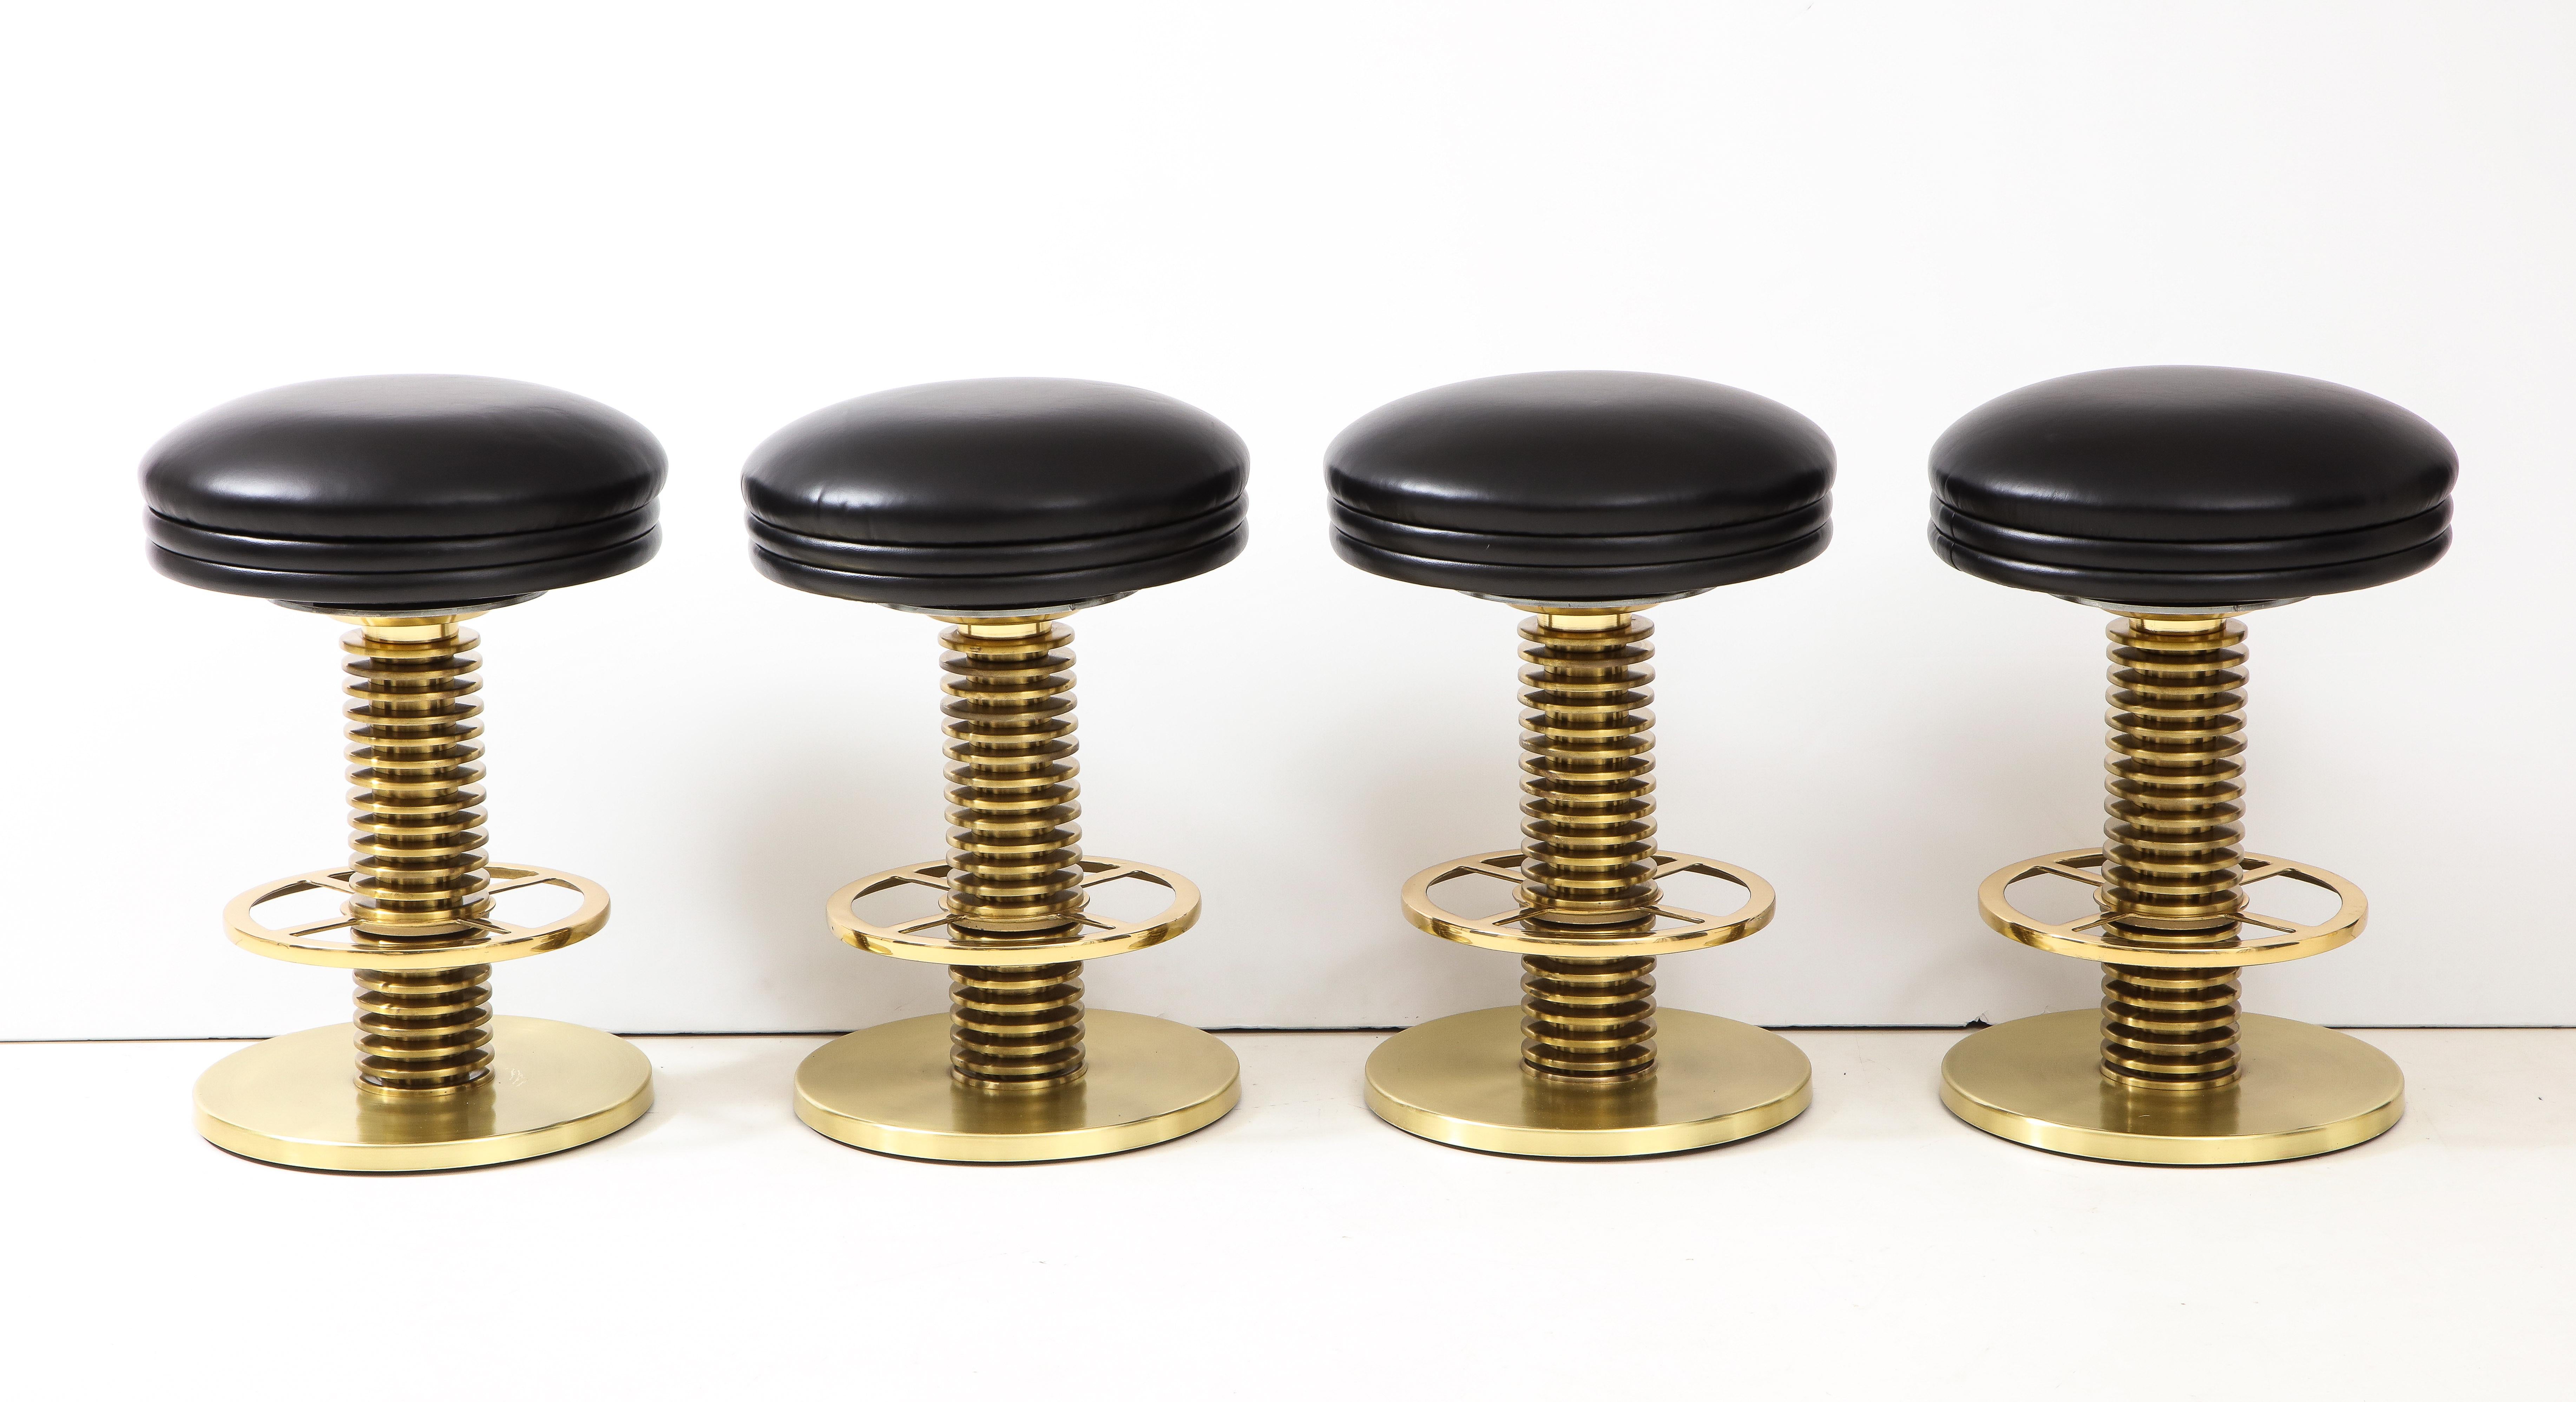 Very set of 4 brass stools by Designs for Leisure.
This unusual custom set of stools have been newly reupholstered in a smooth black leather.
The swivel seats sit on a stacked column base with a polished brass foot rest.